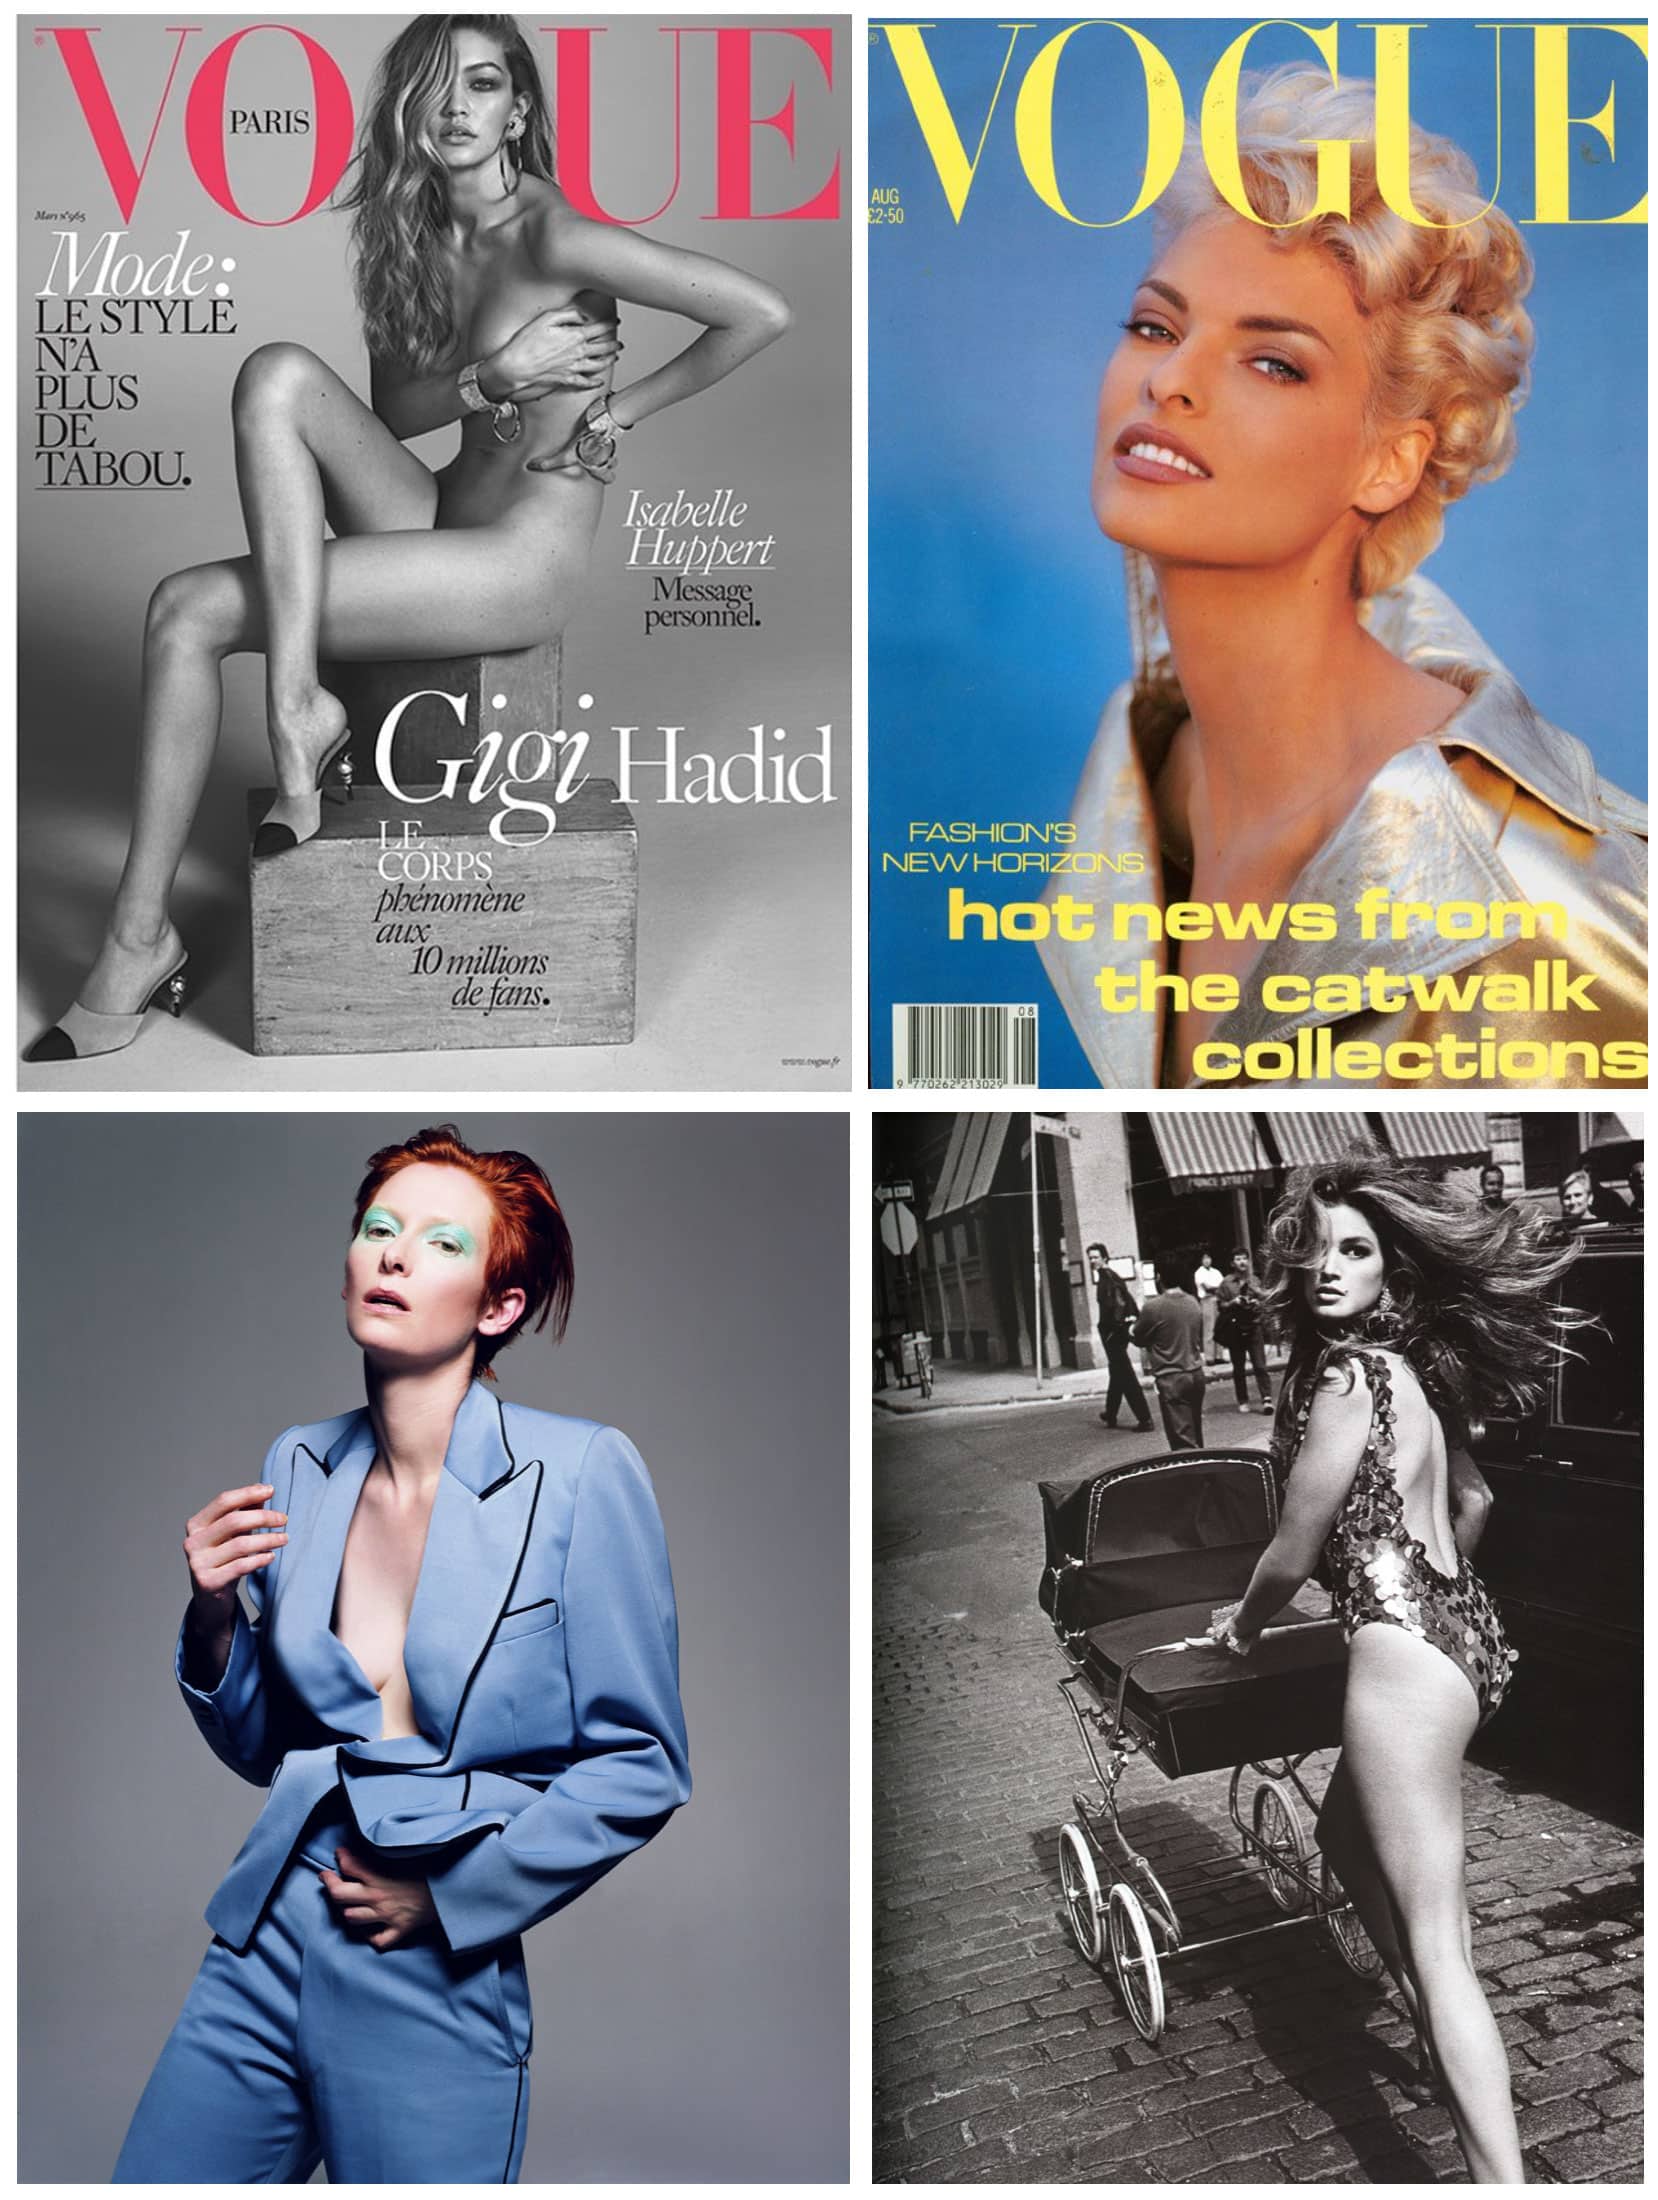 Clockwise from top left:Gigi Hadid by Mert and Marcus: Linda Evangelista by Patrick Demarchelier: Cindy Crawford by Patrick Demarchelier: Tilda Swinton by Craig McDean. All hair by Sam McKnight.